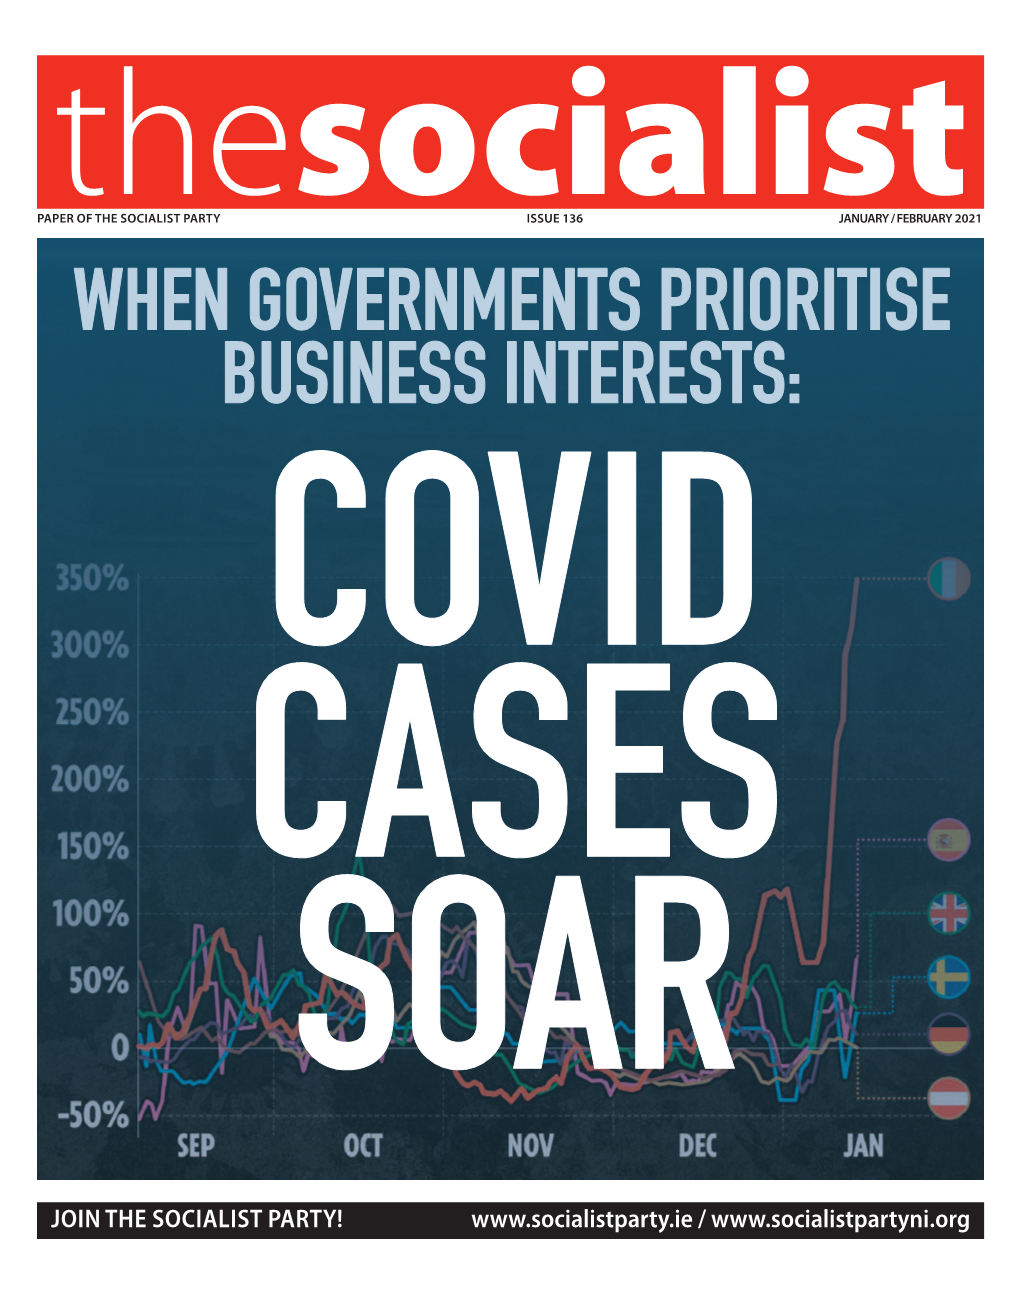 When Governments Prioritise Business Interests: Covid Cases Soar